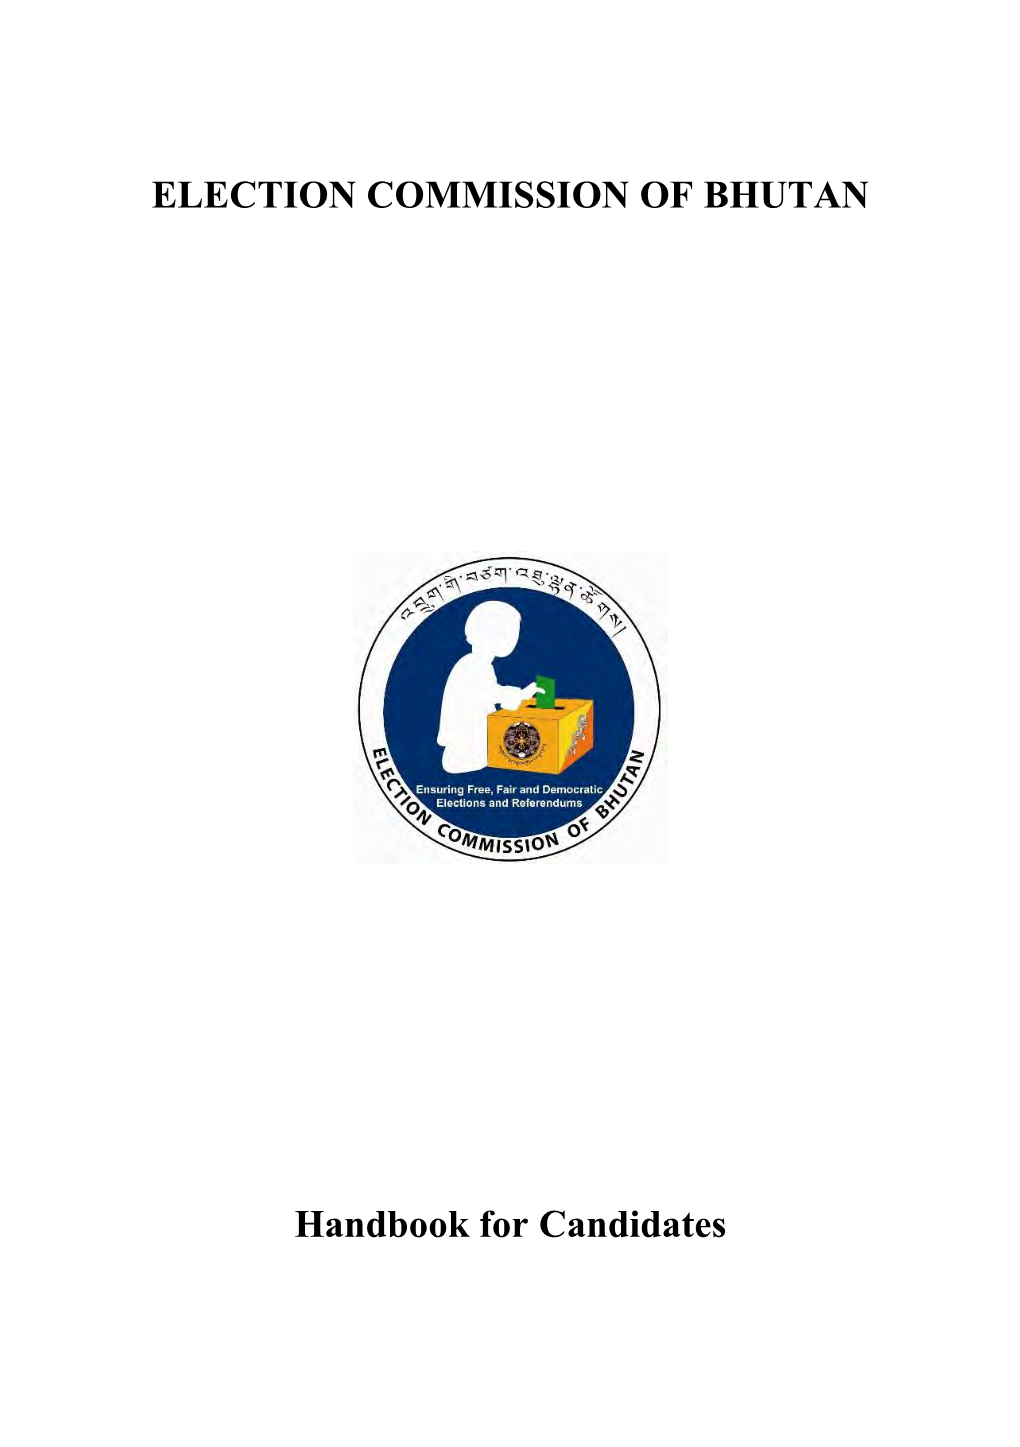 ELECTION COMMISSION of BHUTAN Handbook for Candidates